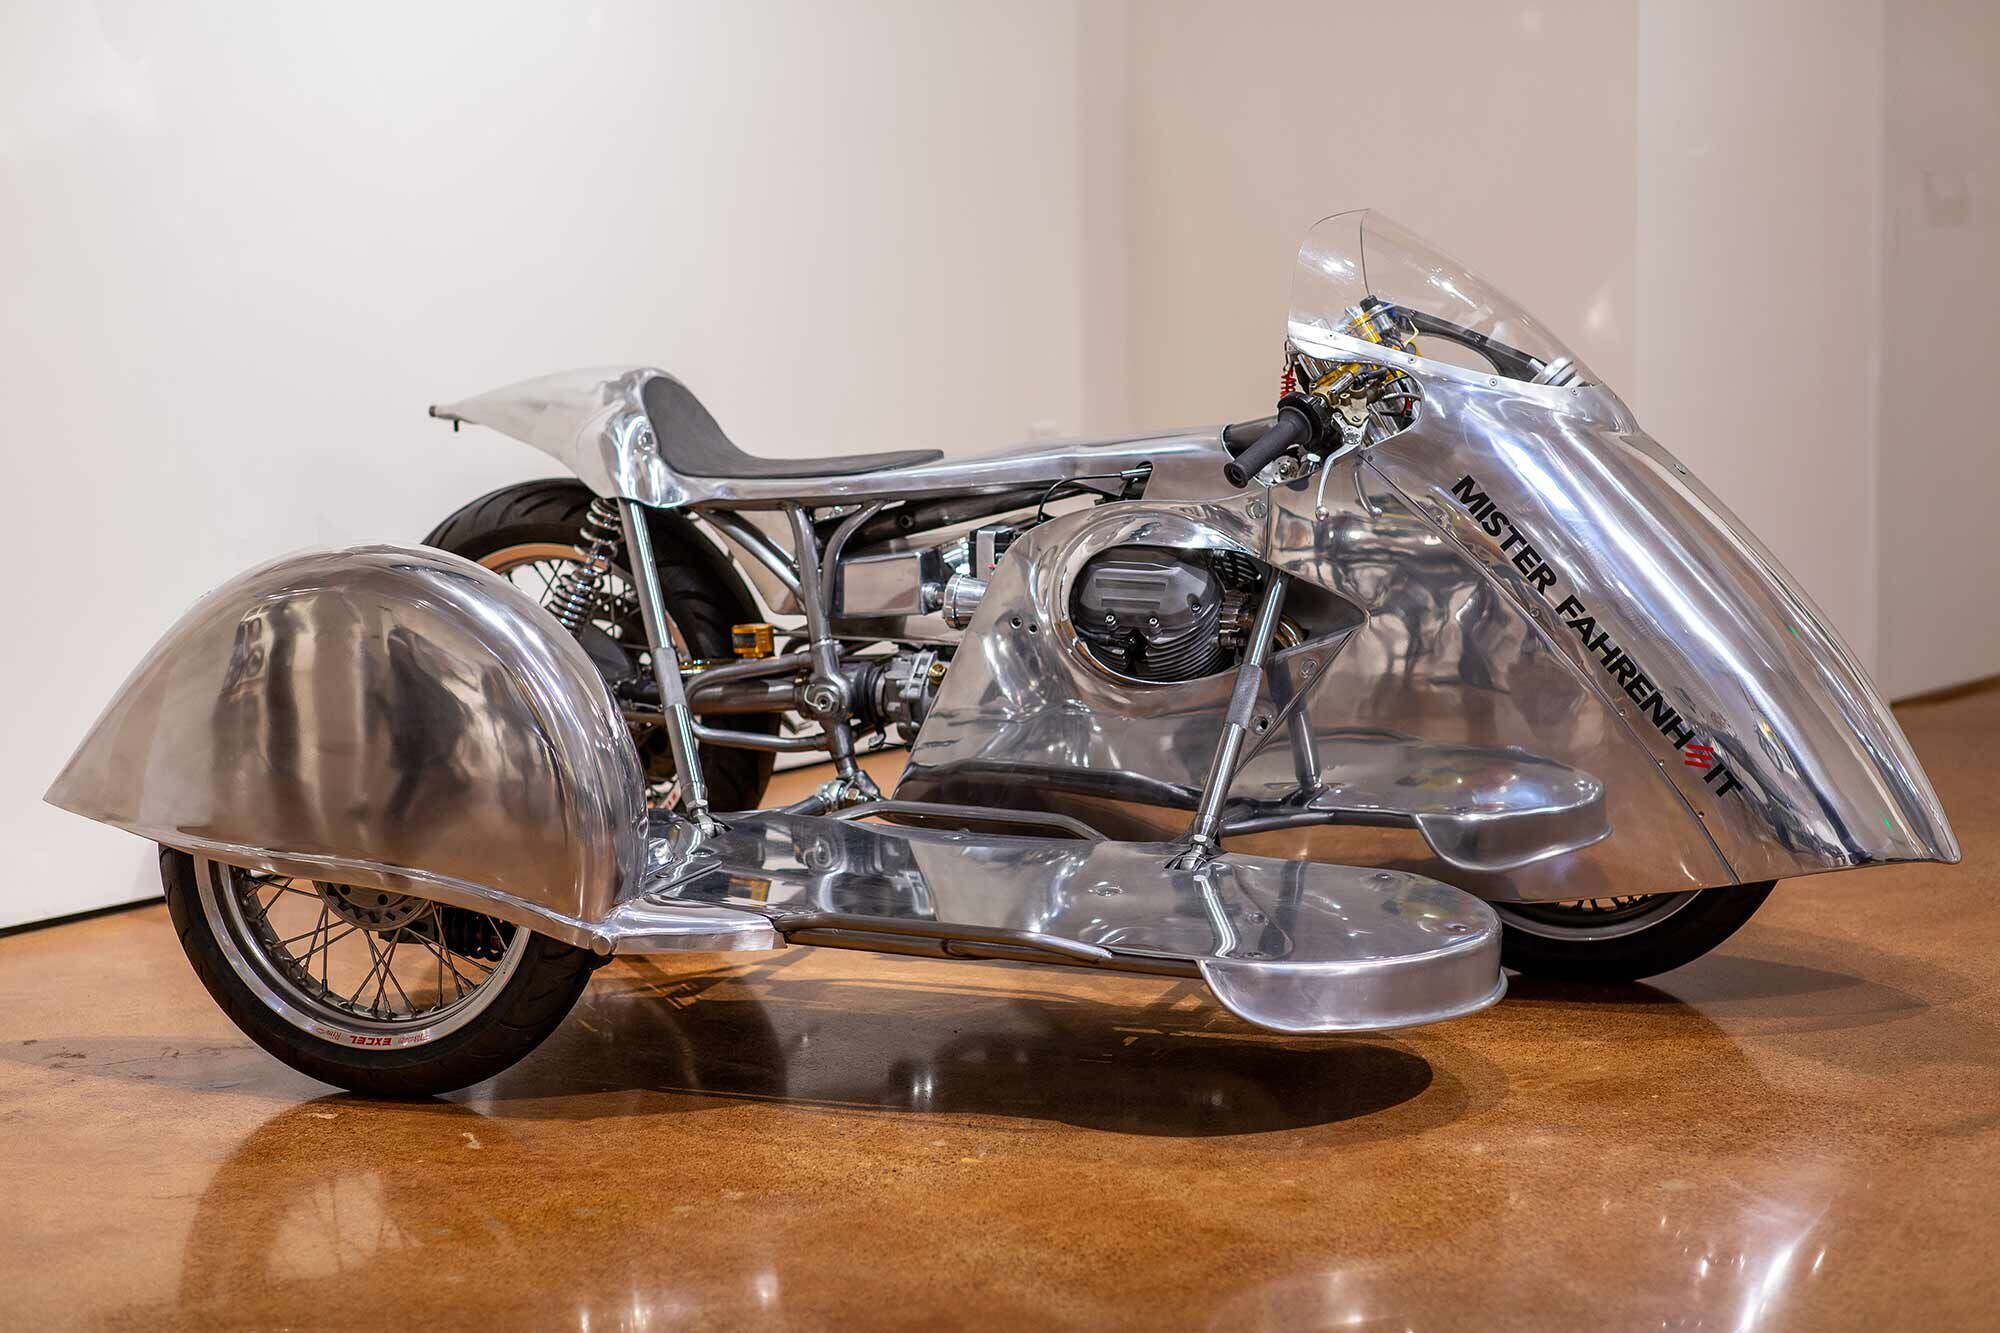 “Mister Fahrenheit” as it sits in the Haas Moto Museum, waiting to see its potential realized on the salt flats.